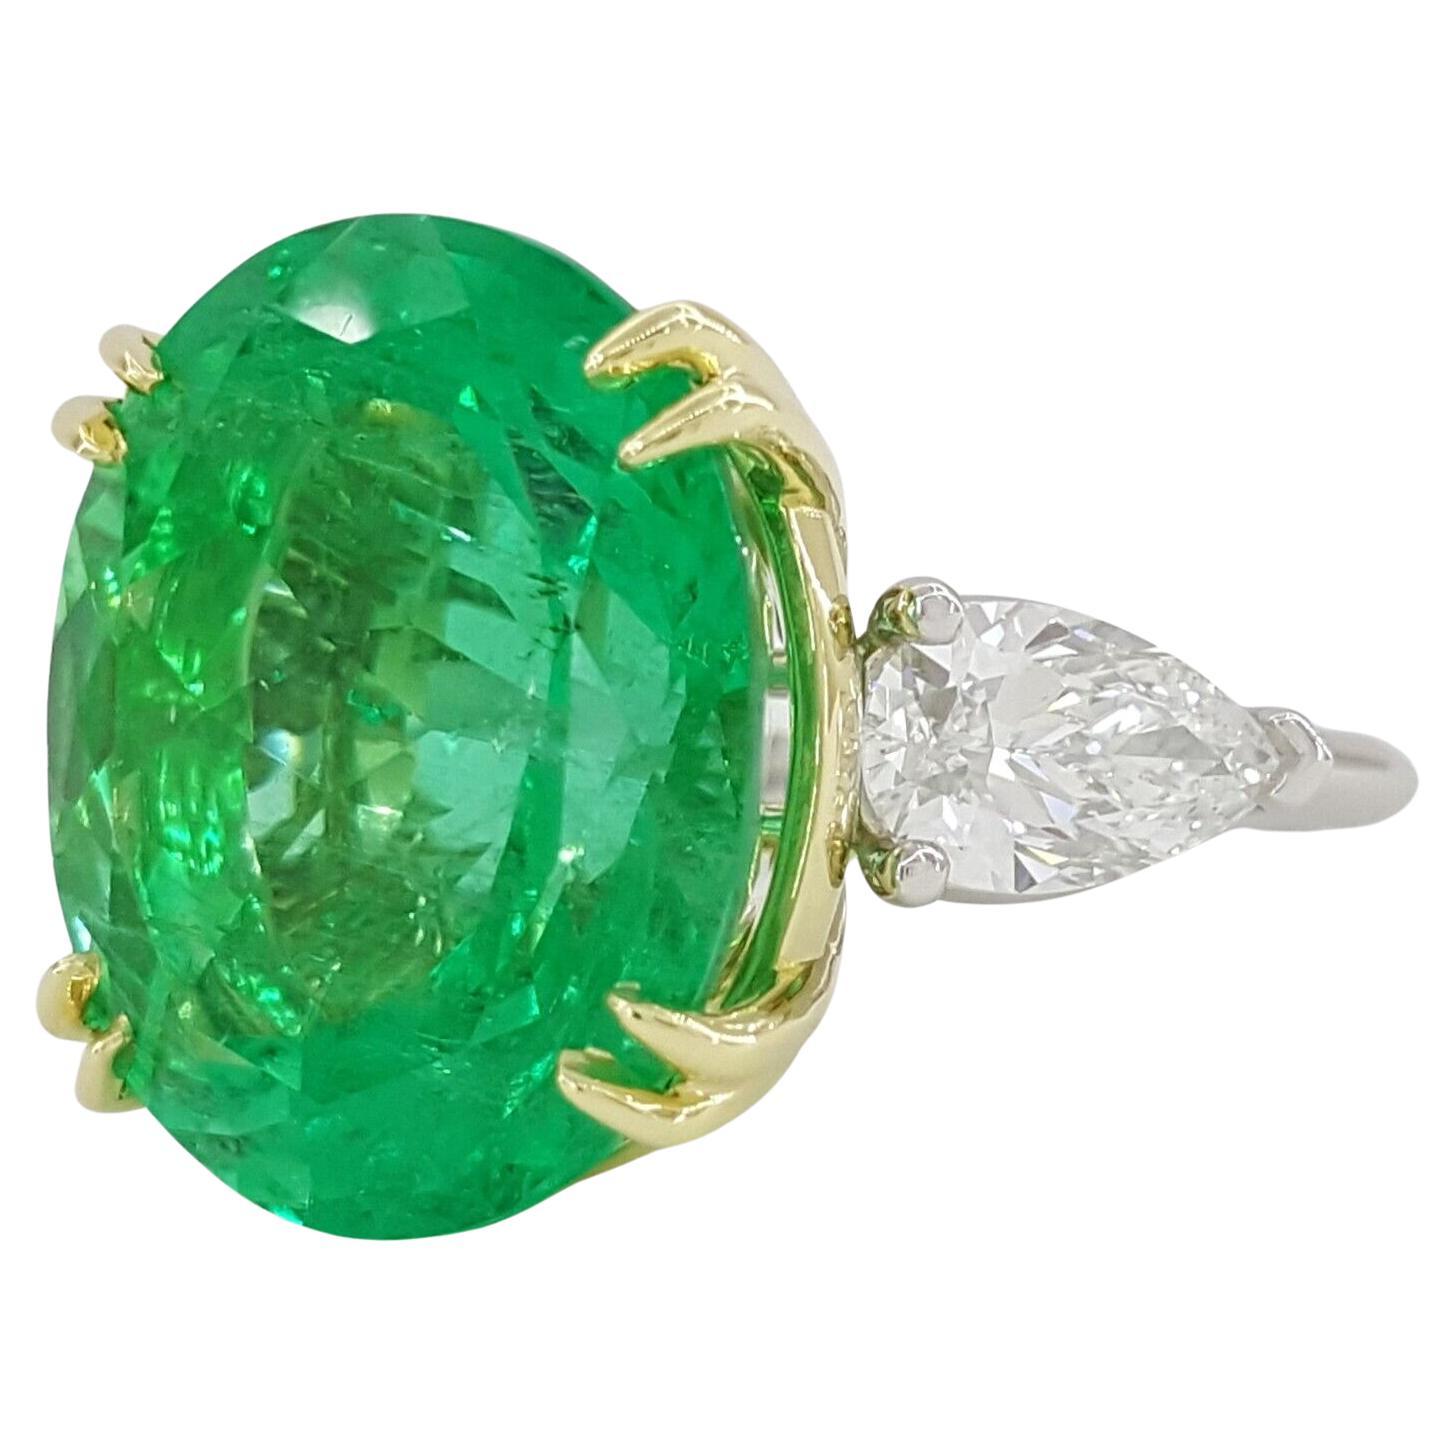 An investment grade Oval Cut Natural Colombian Green Emerald & Pear Cut Diamond Engagement Ring. 

The ring weighs 16.9 grams, size 6.5. The center stone is a very lively Natural Oval Cut Green Emerald weighing 20.19 ct, Green in color. The